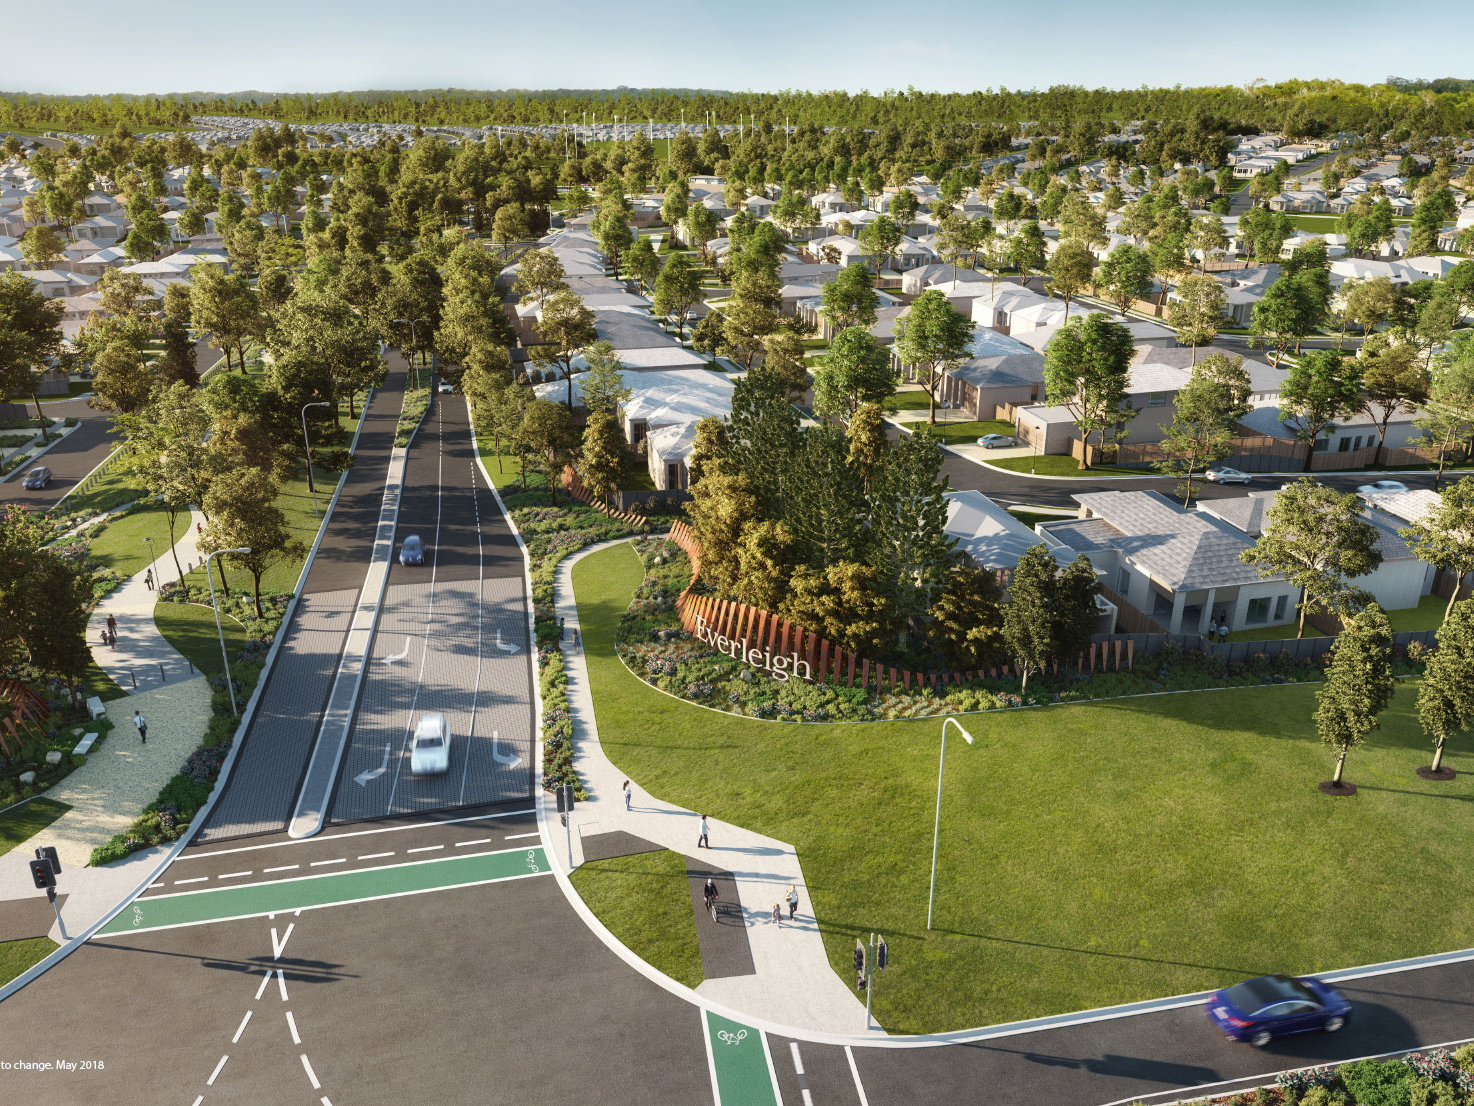 Mirvac has opened a new $5.1 million parkland to the public as part of its Everleigh masterplanned community in Greenbank,&nbsp;located on the Eva Creek in central Queensland, a distance of about 1380km northwest from Brisbane. Image: Supplied.
